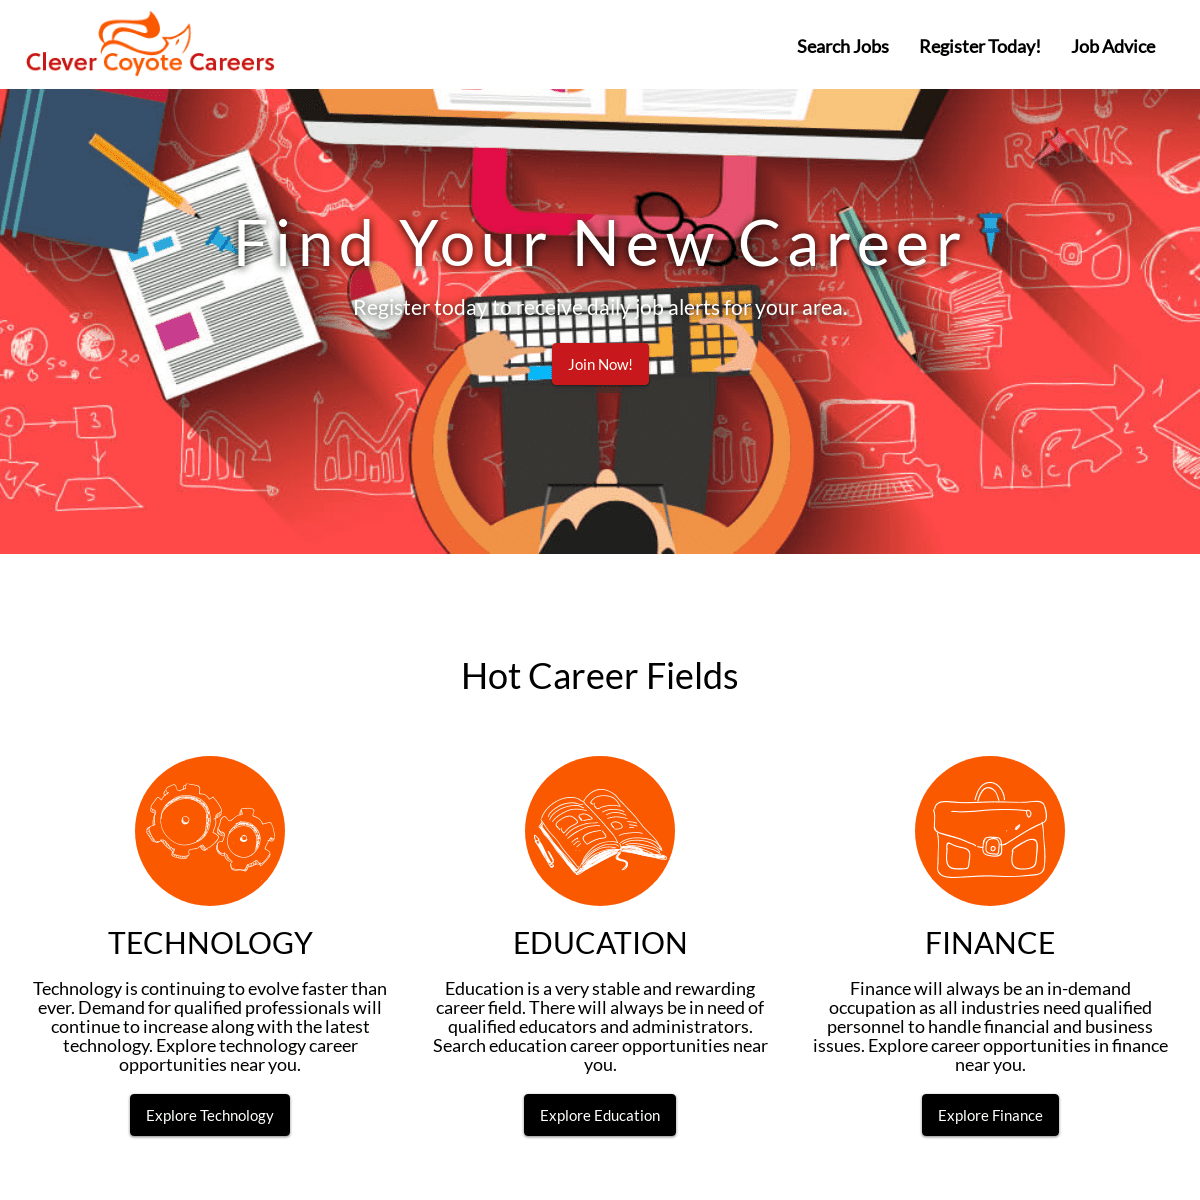 A complete backup of clevercoyotecareers.com